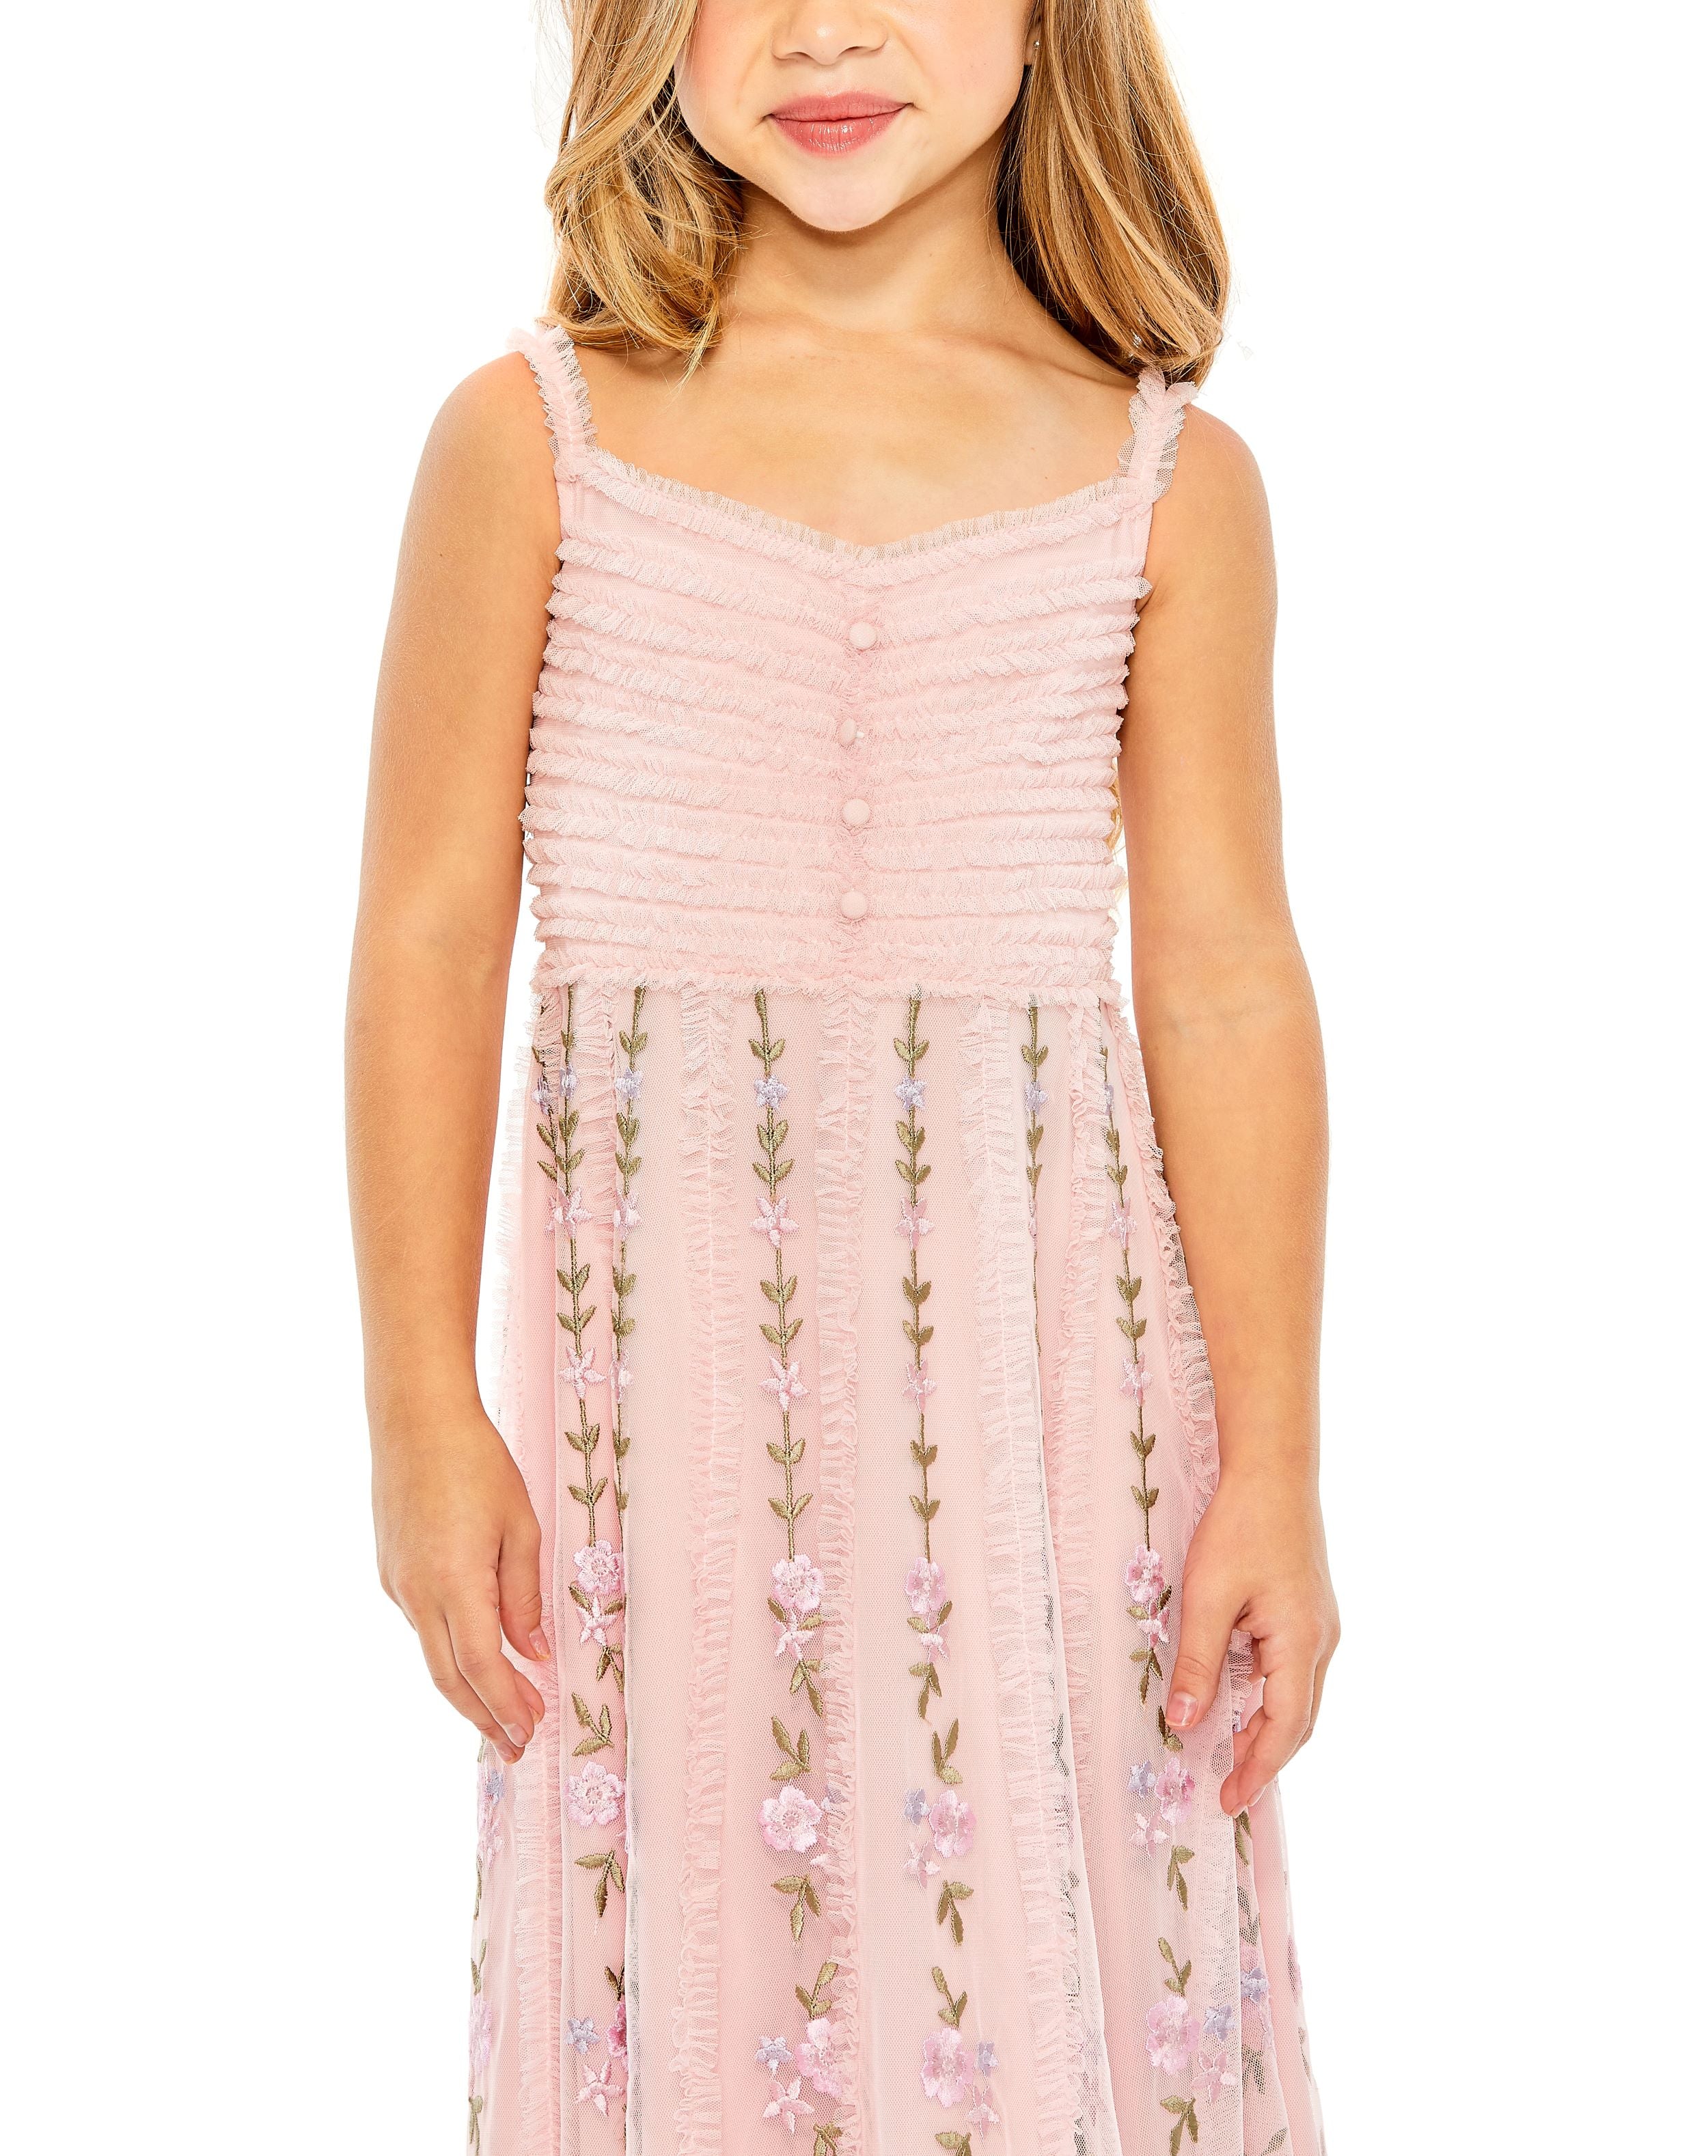 Girls Ruffle Floral Embroidered Detail Mini Dress